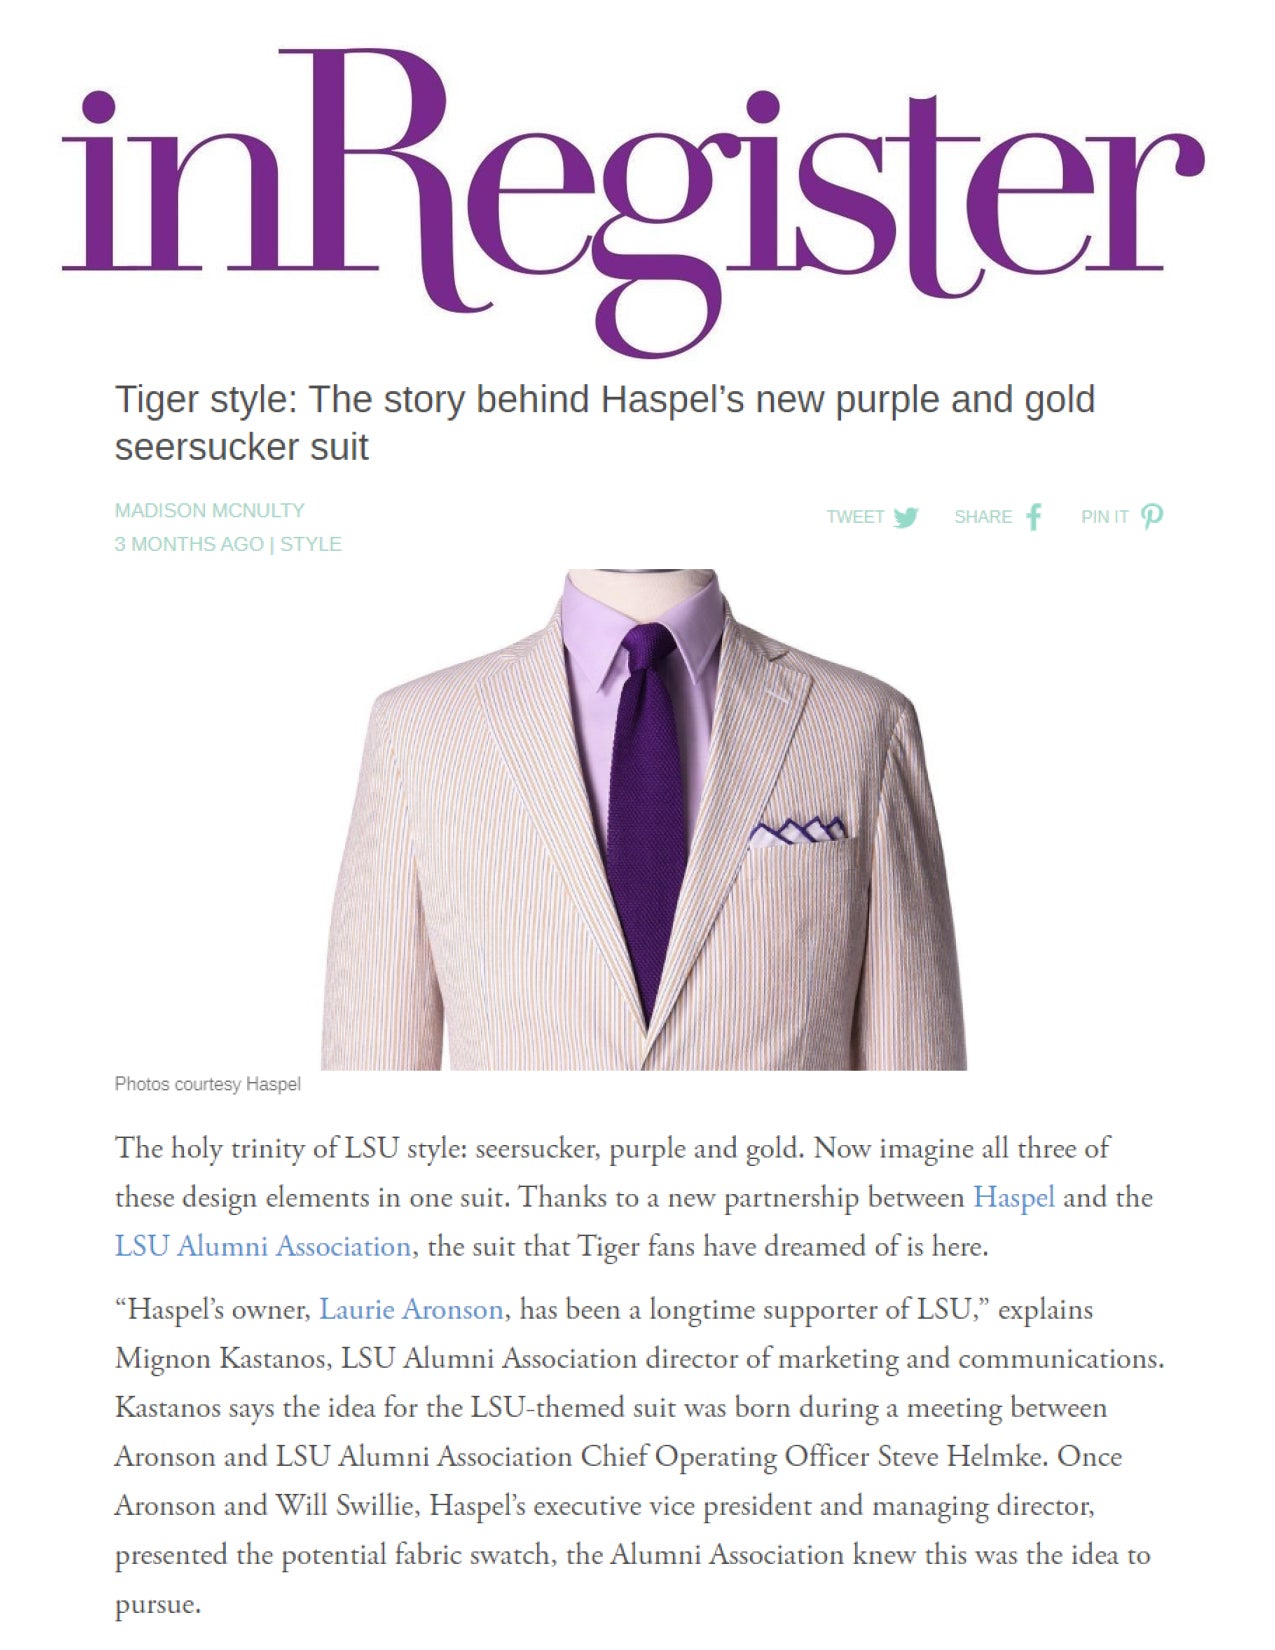 Tiger style: The story behind Haspel’s new purple and gold seersucker suit | InRegister | SEPTEMBER 2019